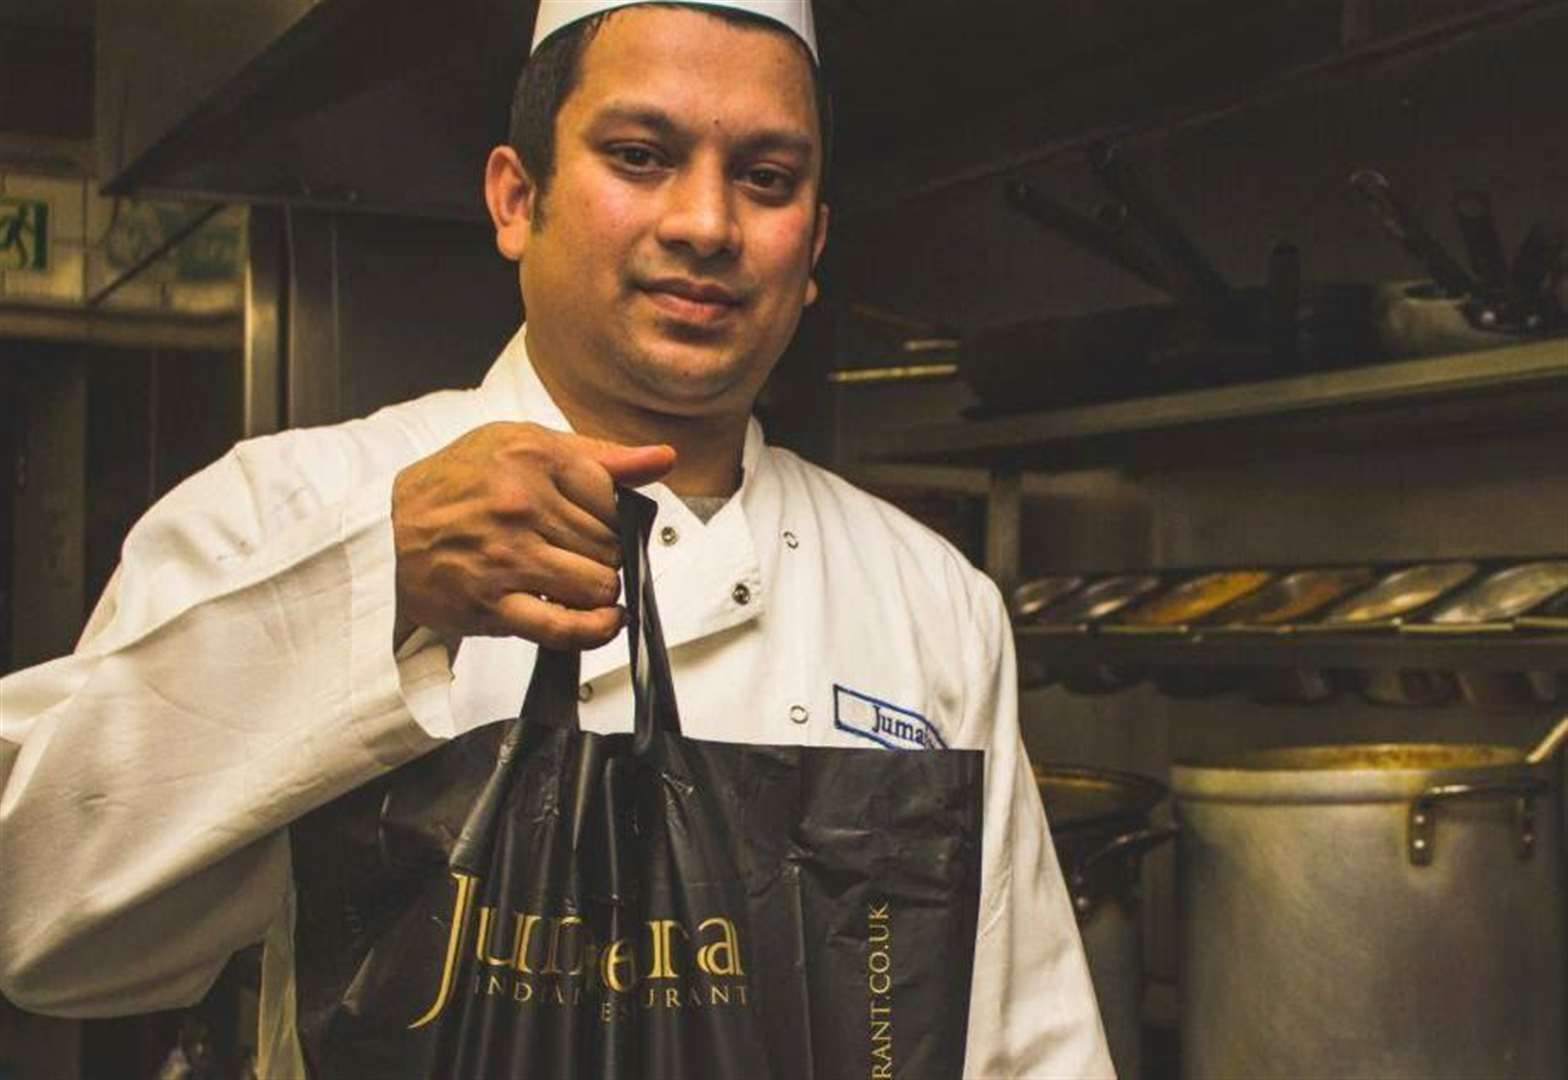 Helping hand: Indian restaurant's complimentary food for NHS staff